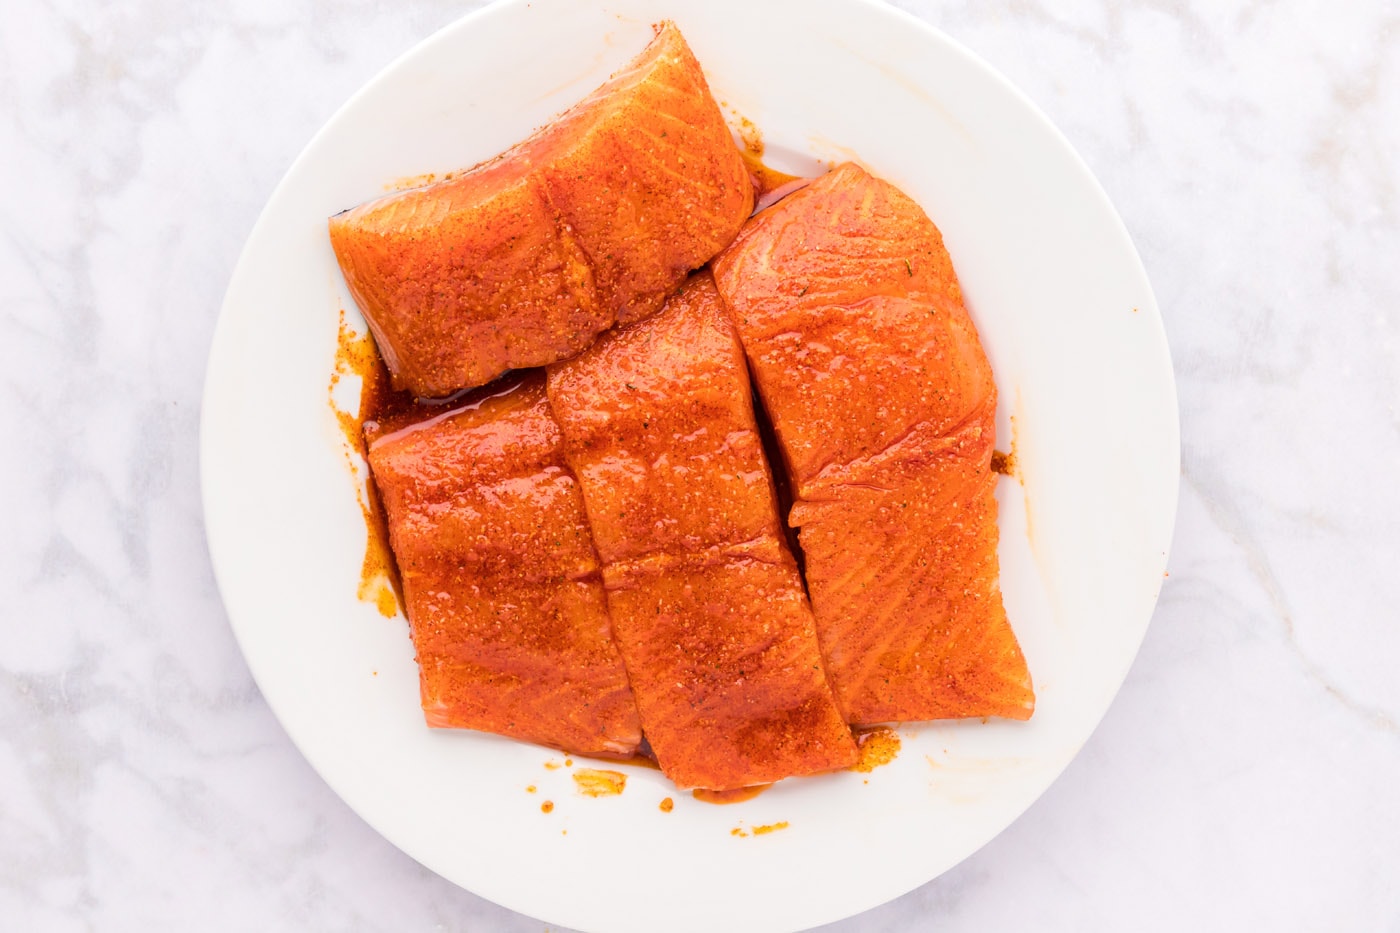 salmon filets coated in a wet rub